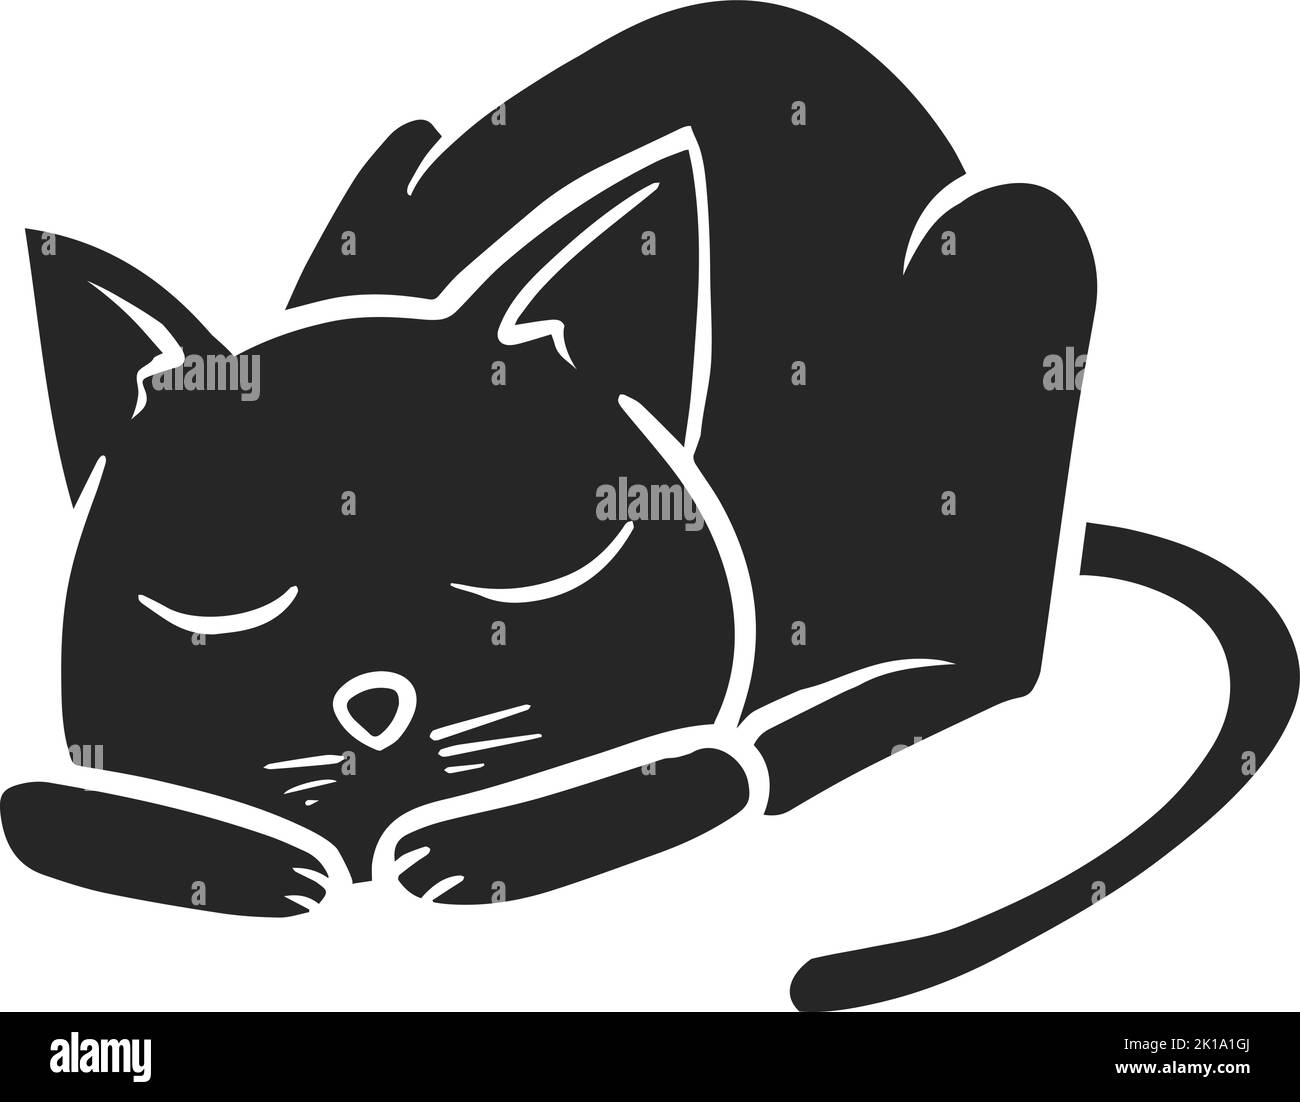 Cats silhouettes on white. Elegant cat icons, funny cartoon